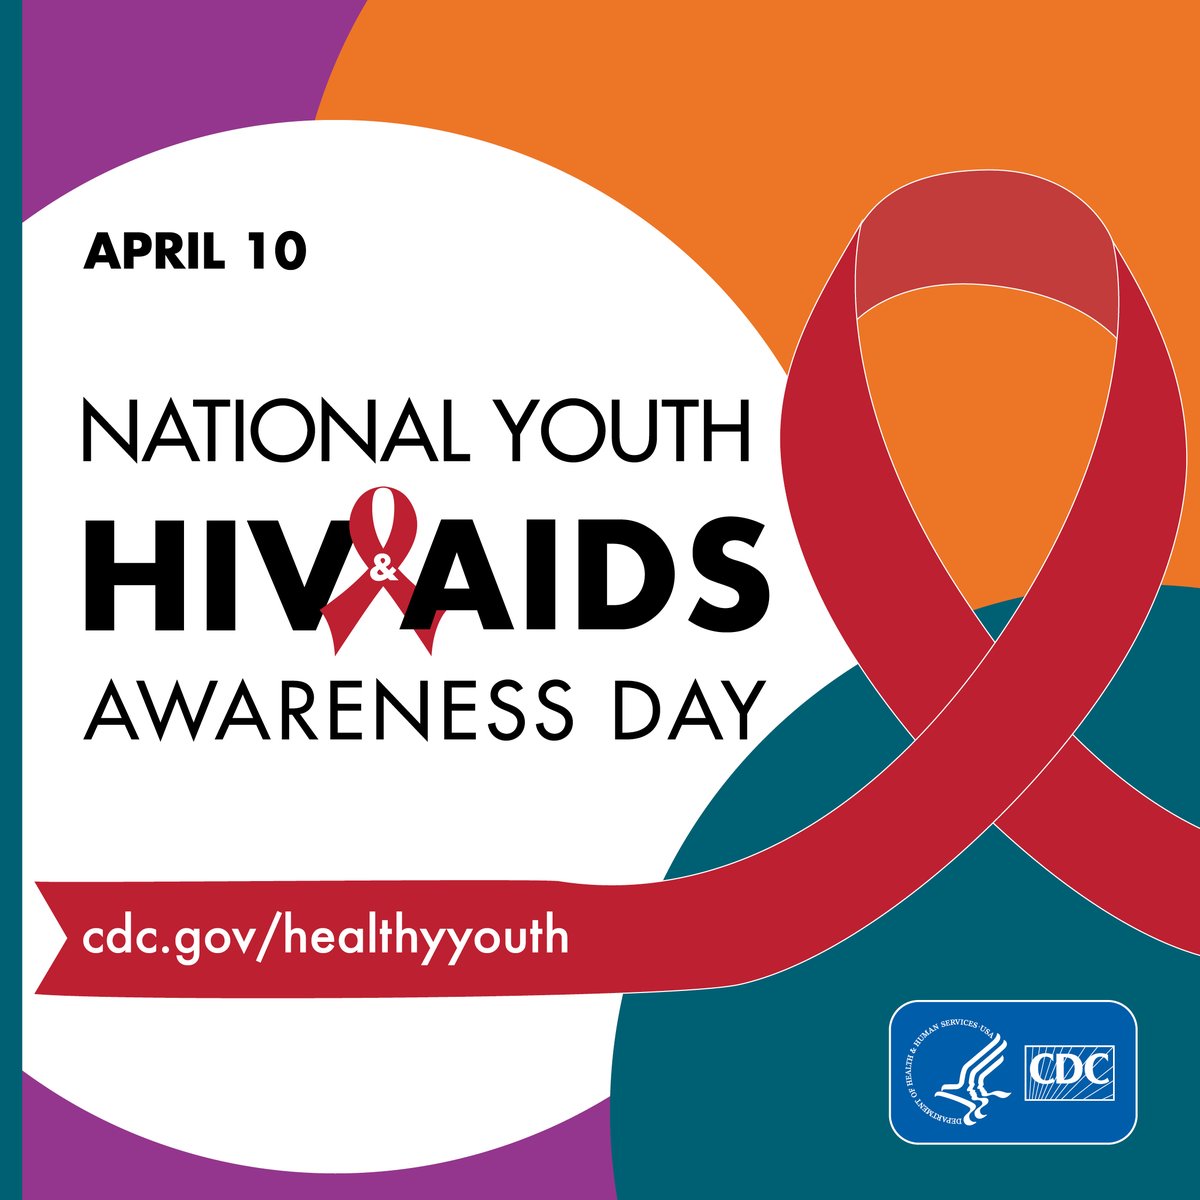 National Youth HIV & AIDS Awareness Day (#NYHAAD) is observed annually to call attention to the impact of HIV/AIDS on young people. Schools and other community spaces can serve as engines of change when it comes to HIV/AIDS prevention and care for youth. cdc.gov/healthyyouth/y…